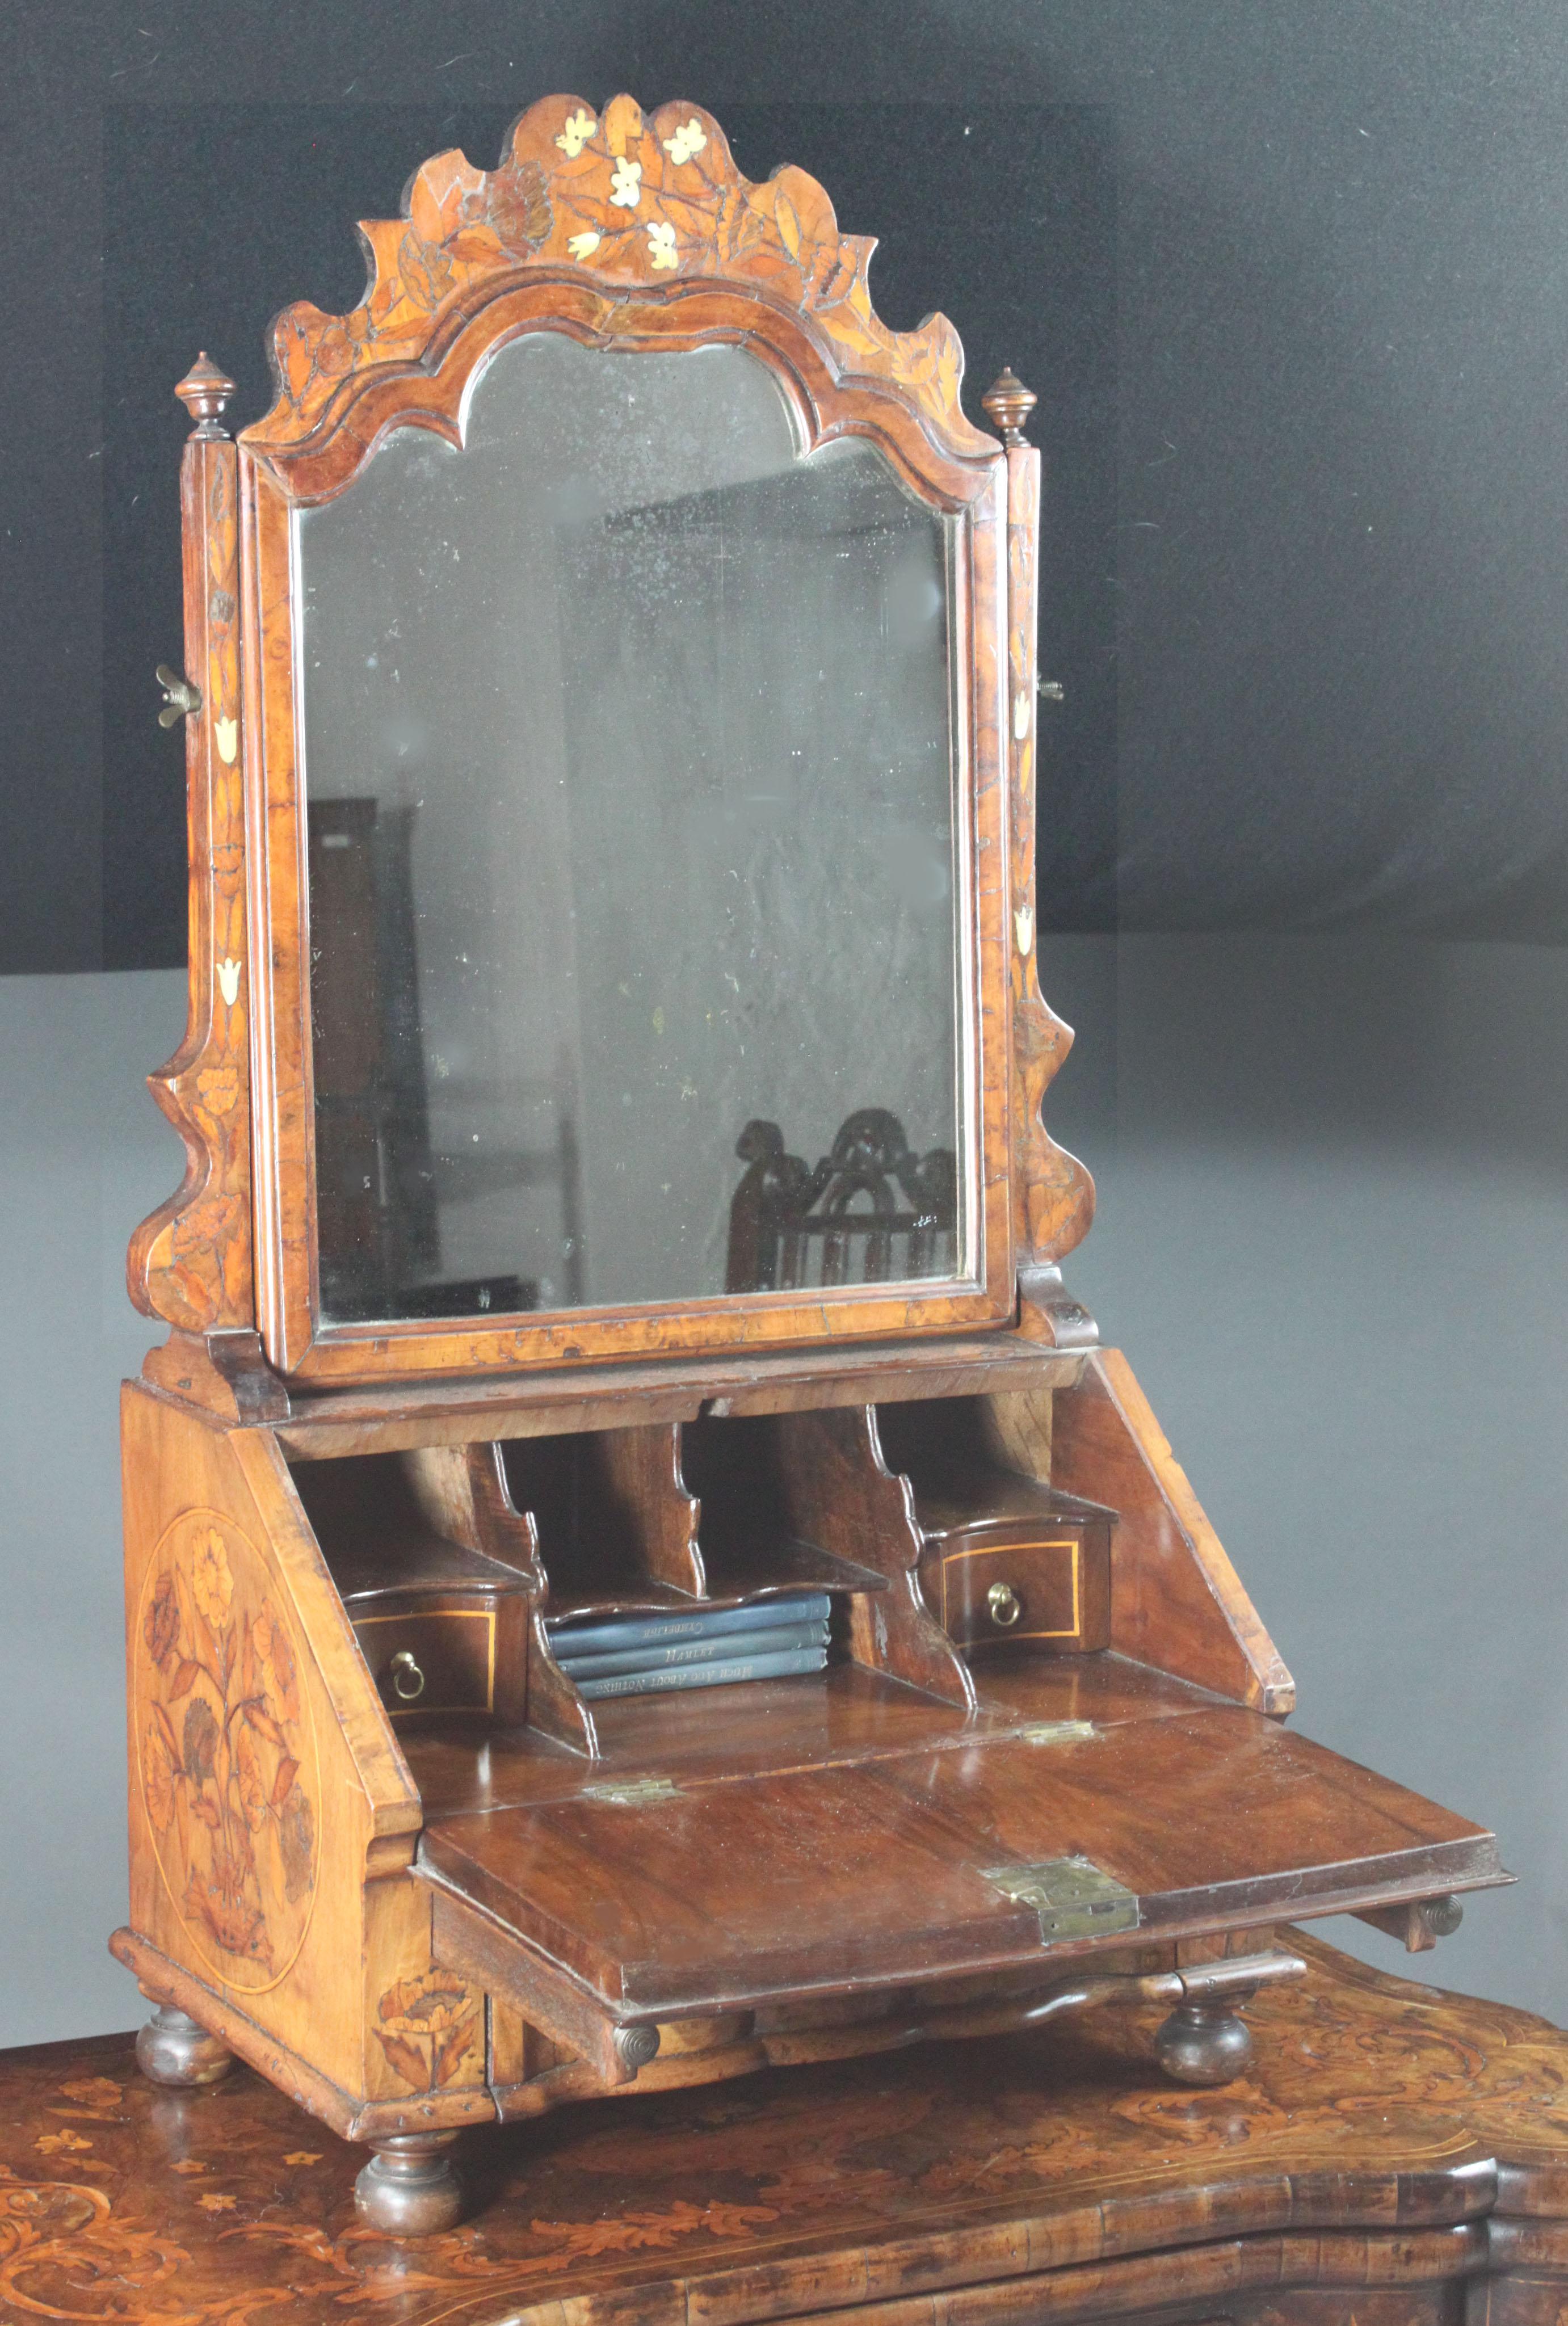 An exceptional Dutch marquetry walnut toilet mirror with flower inlays in bone and woods. Original colour and patina. Attractive shaping to the mirror frame and drawer front. Fitted as a small writing desk complete with pigeon holes and interior